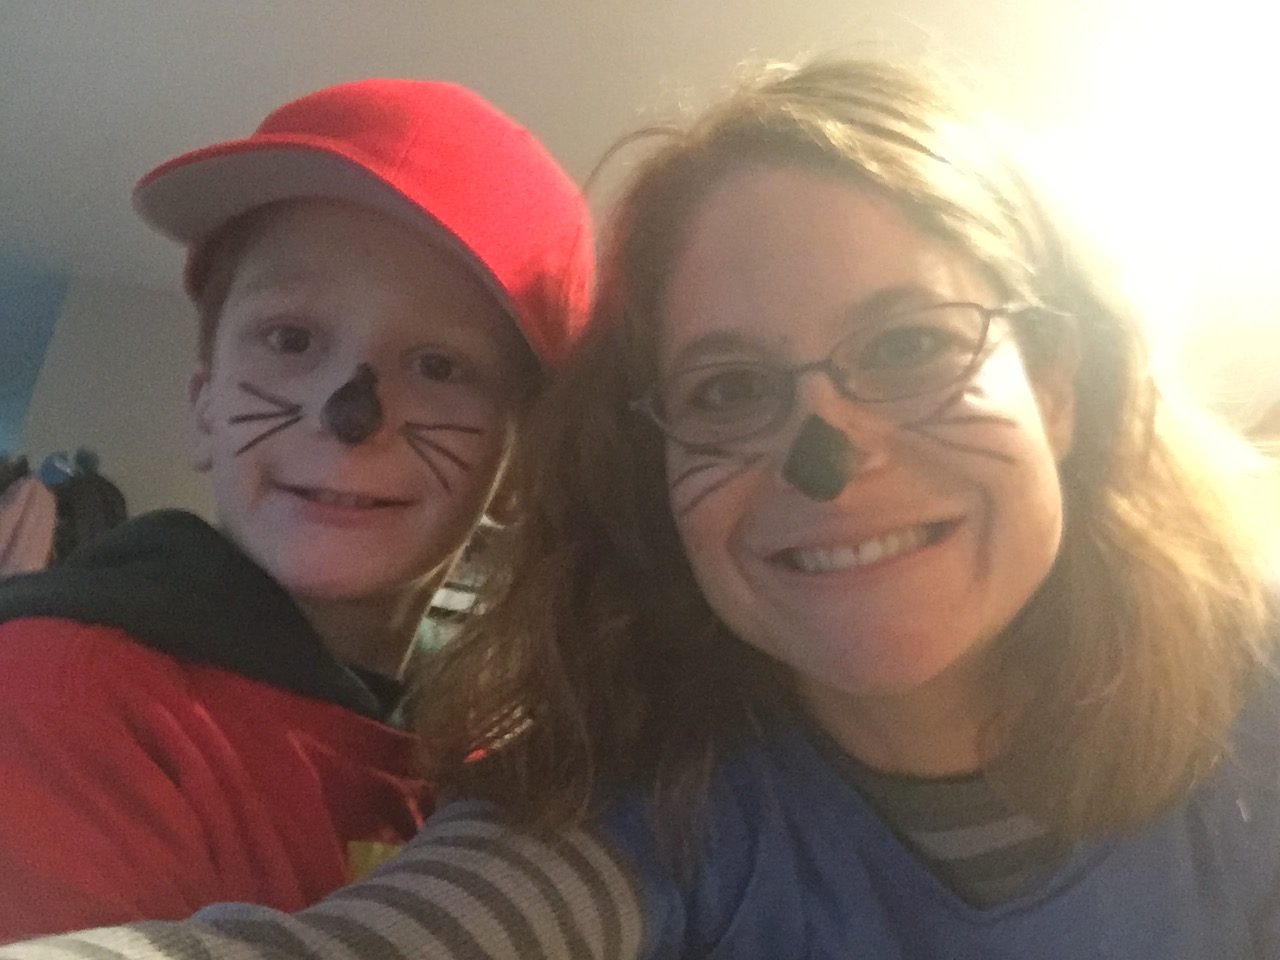 Nate and his mom dressed as chipmunks.